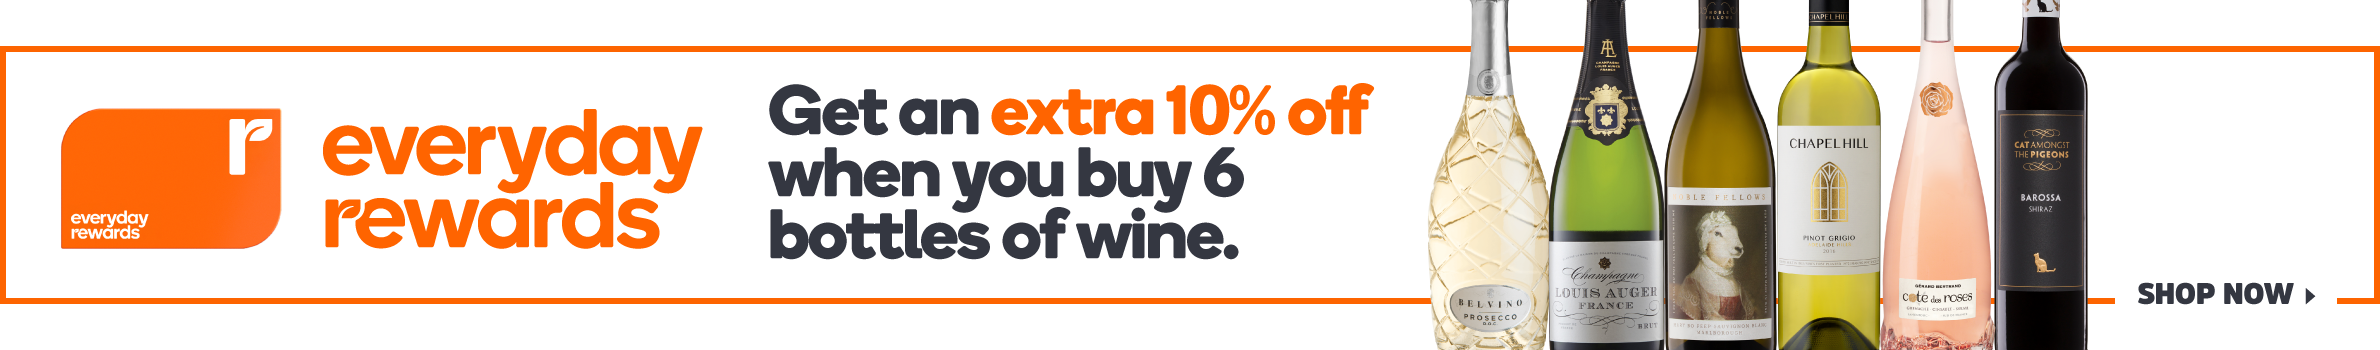 Save on wine with Everyday Rewards and BWS